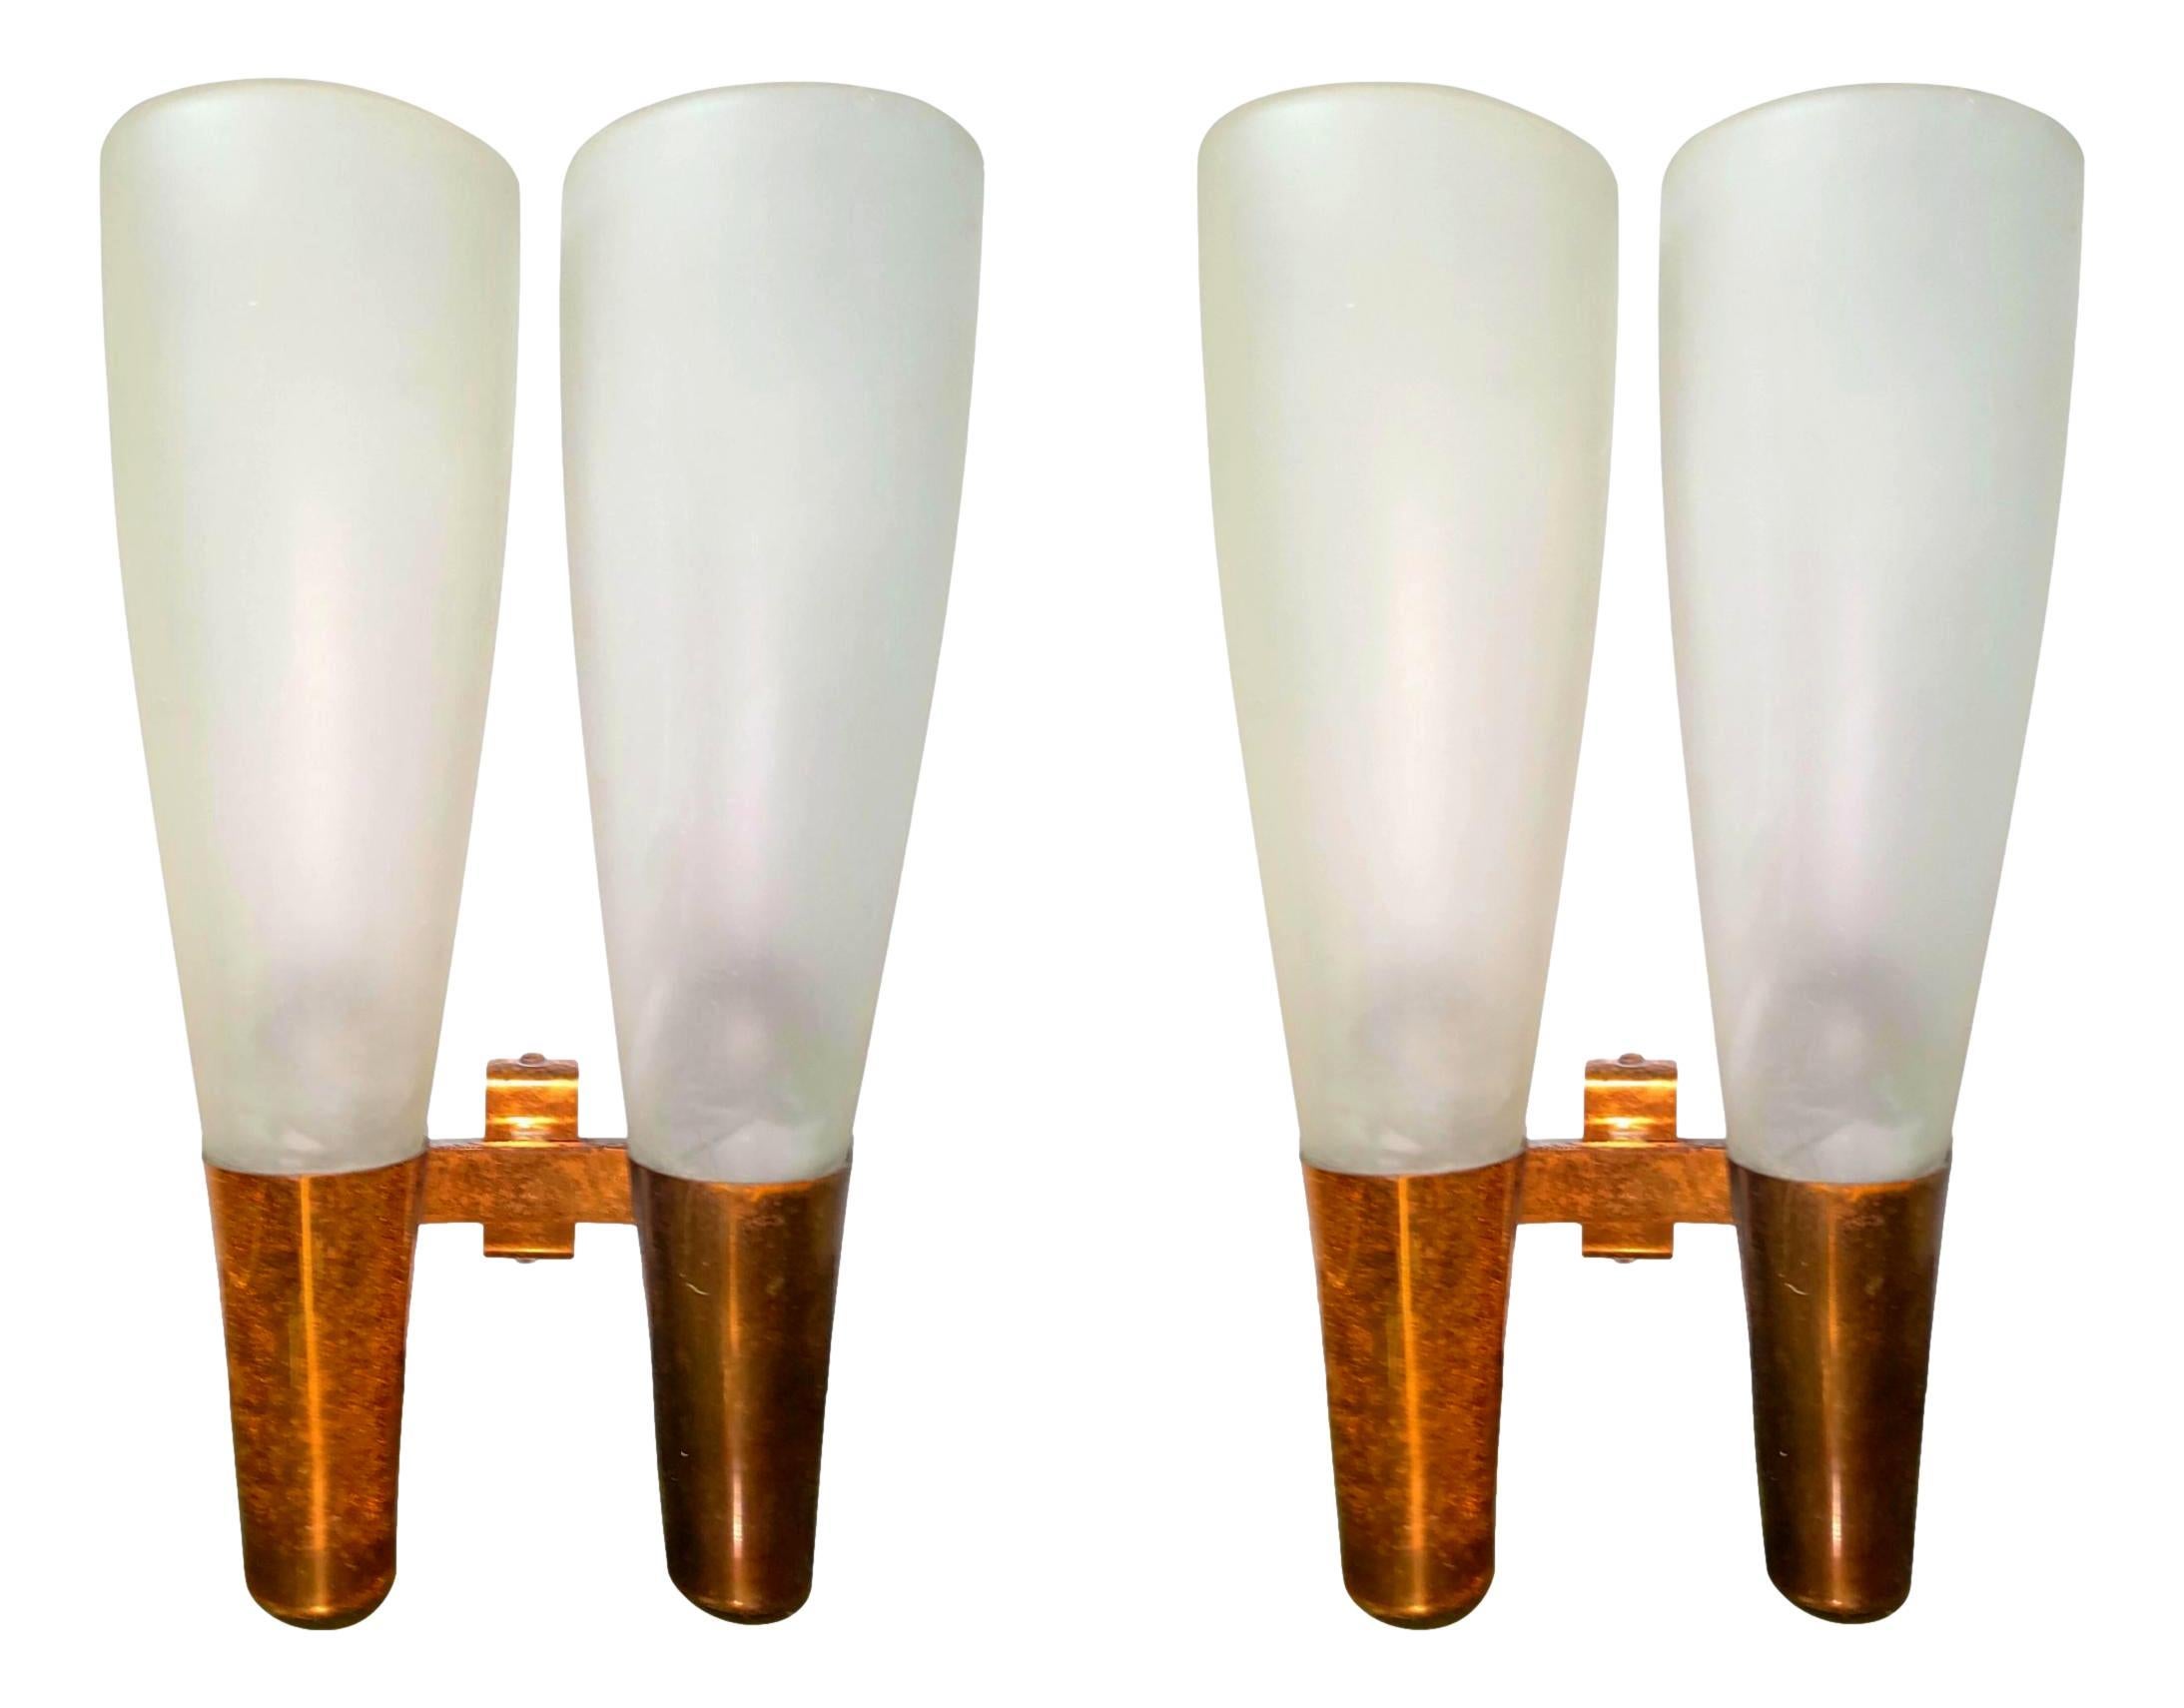 very rare couple of wall lamps model 1537 designed by Pietro Chiesa for Fontana Arte, about 1935, with two lights for each one, made all in brass with murano satin glass shades.
each one has these measurements: height cm 47, width cm 28, depht cm